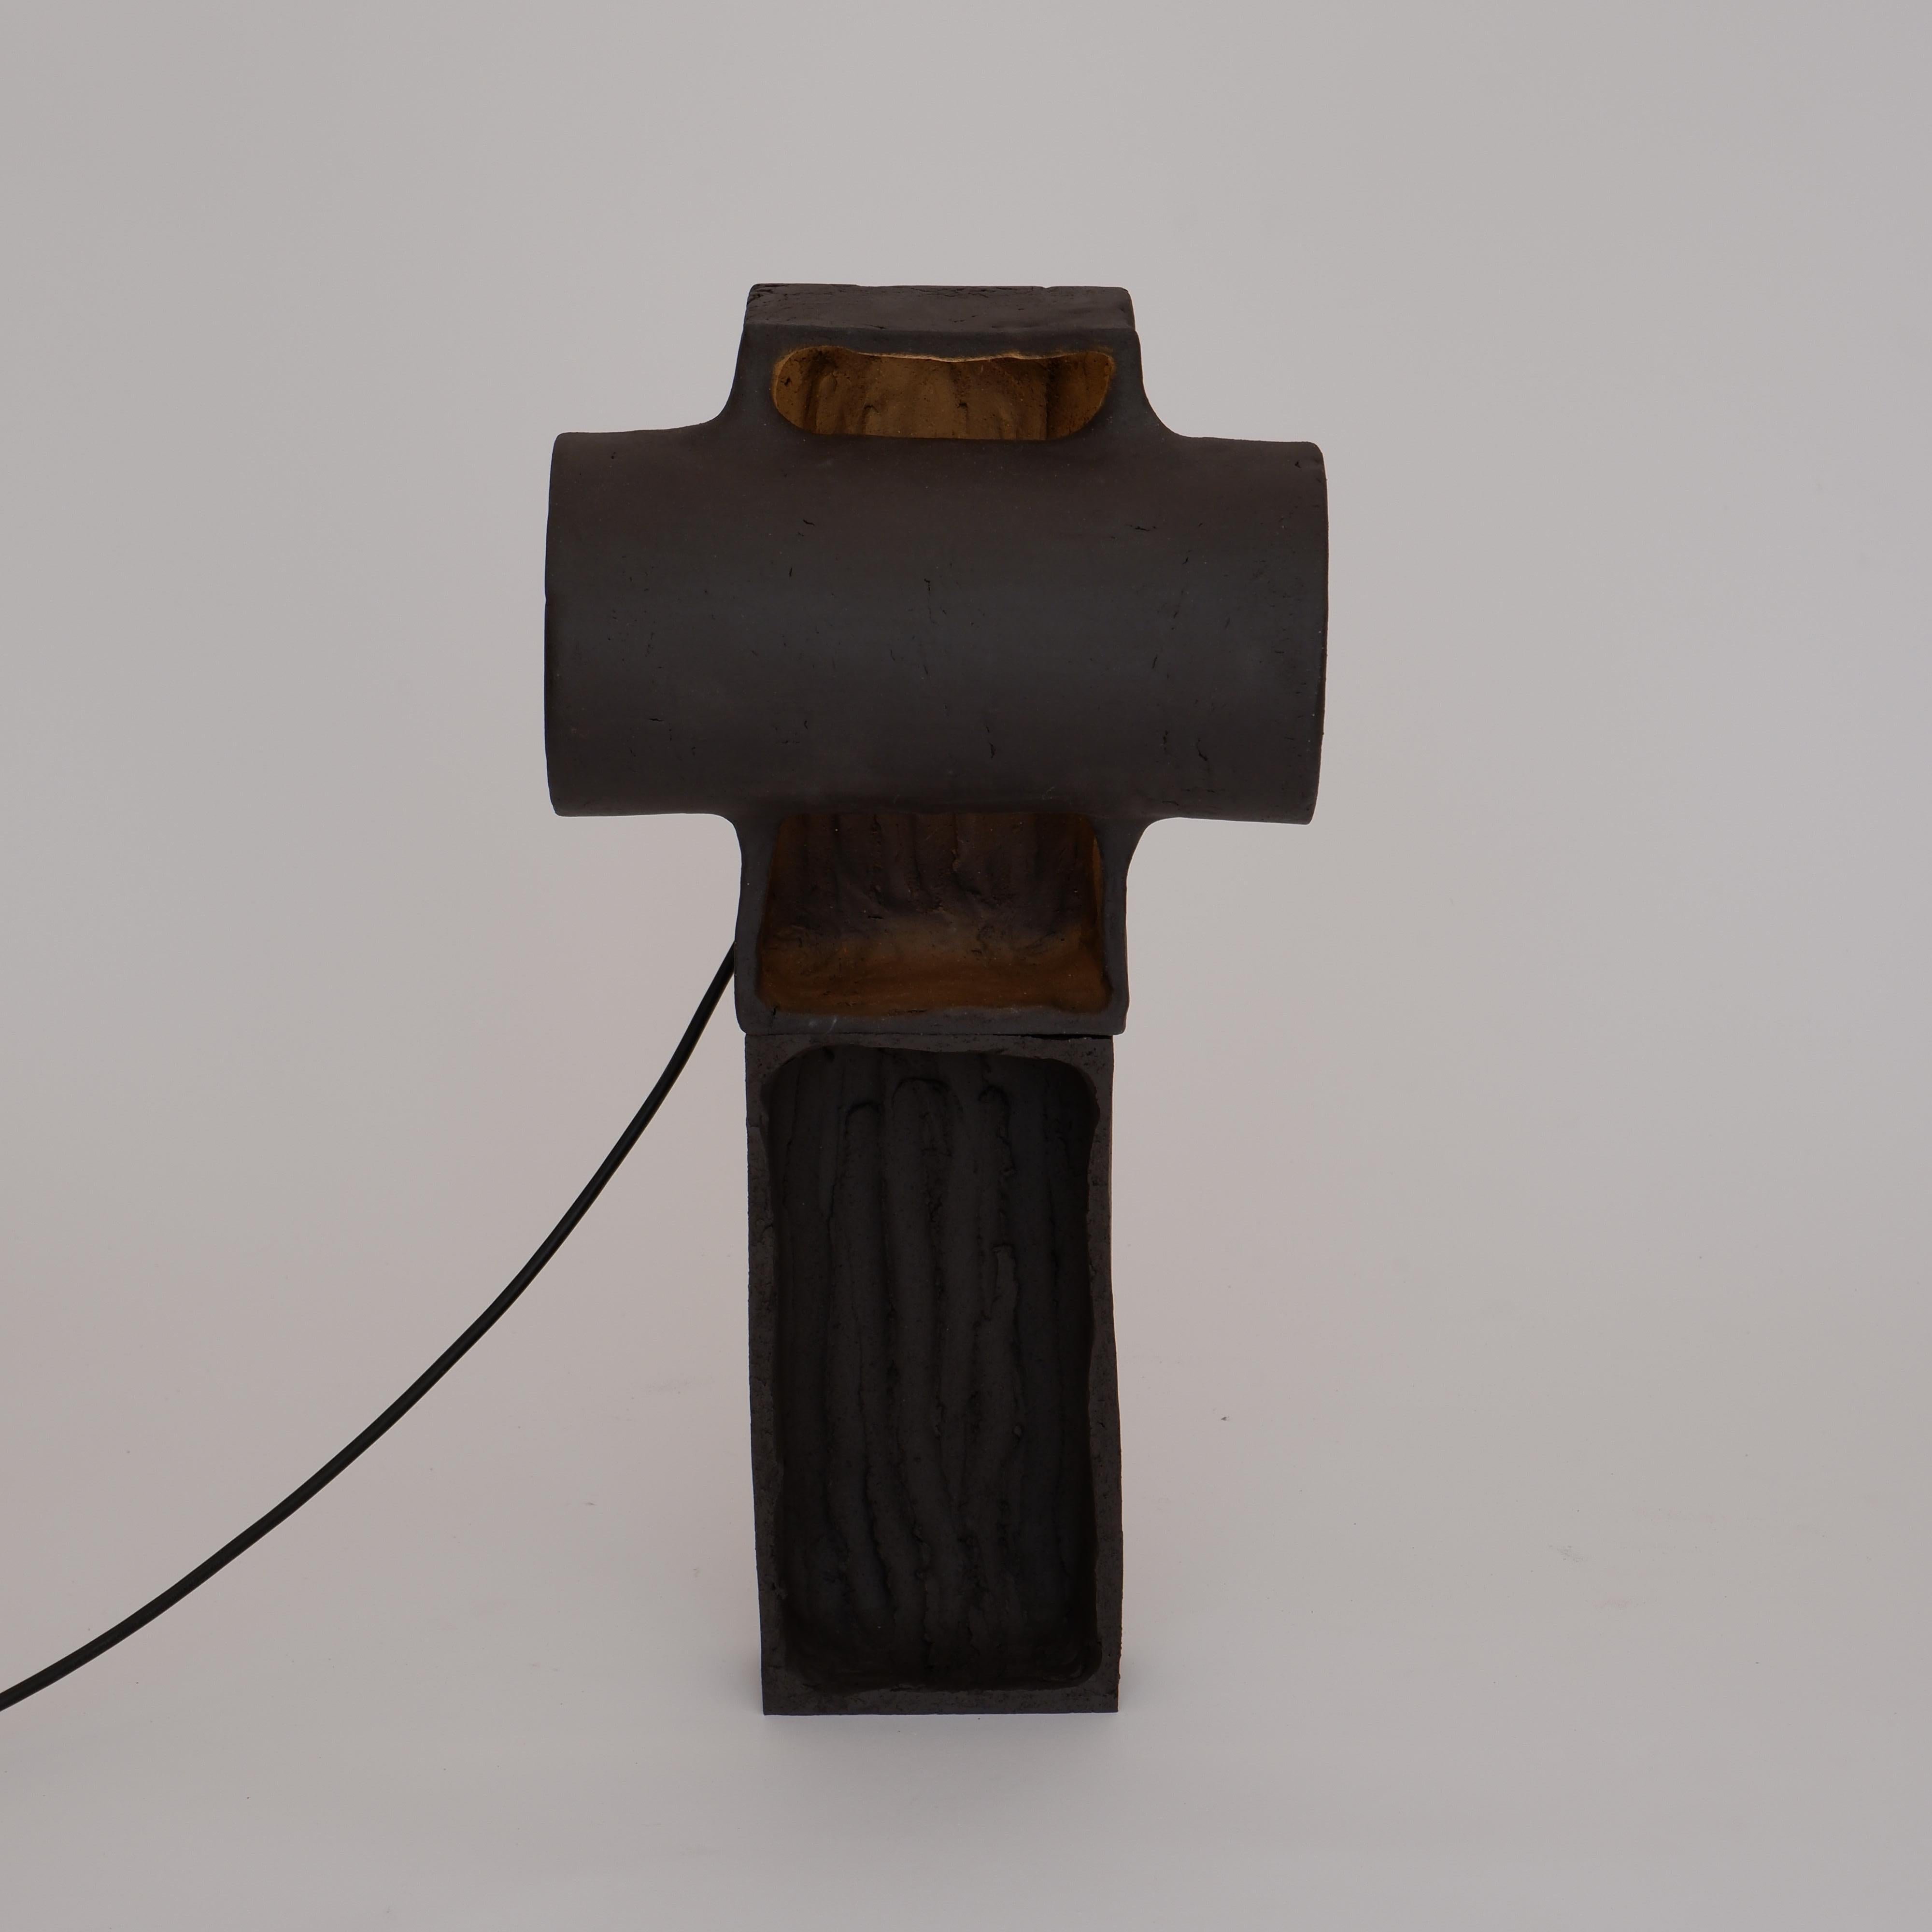 Accre Tall Black Lamp by Ia Kutateladze
One Of A Kind.
Dimensions: D 20 x W 23 x H 44 cm.
Materials: Clay.

Each piece is one of a kind, due to its free hand-building process. Different color variations available: raw black clay, raw white clay, raw